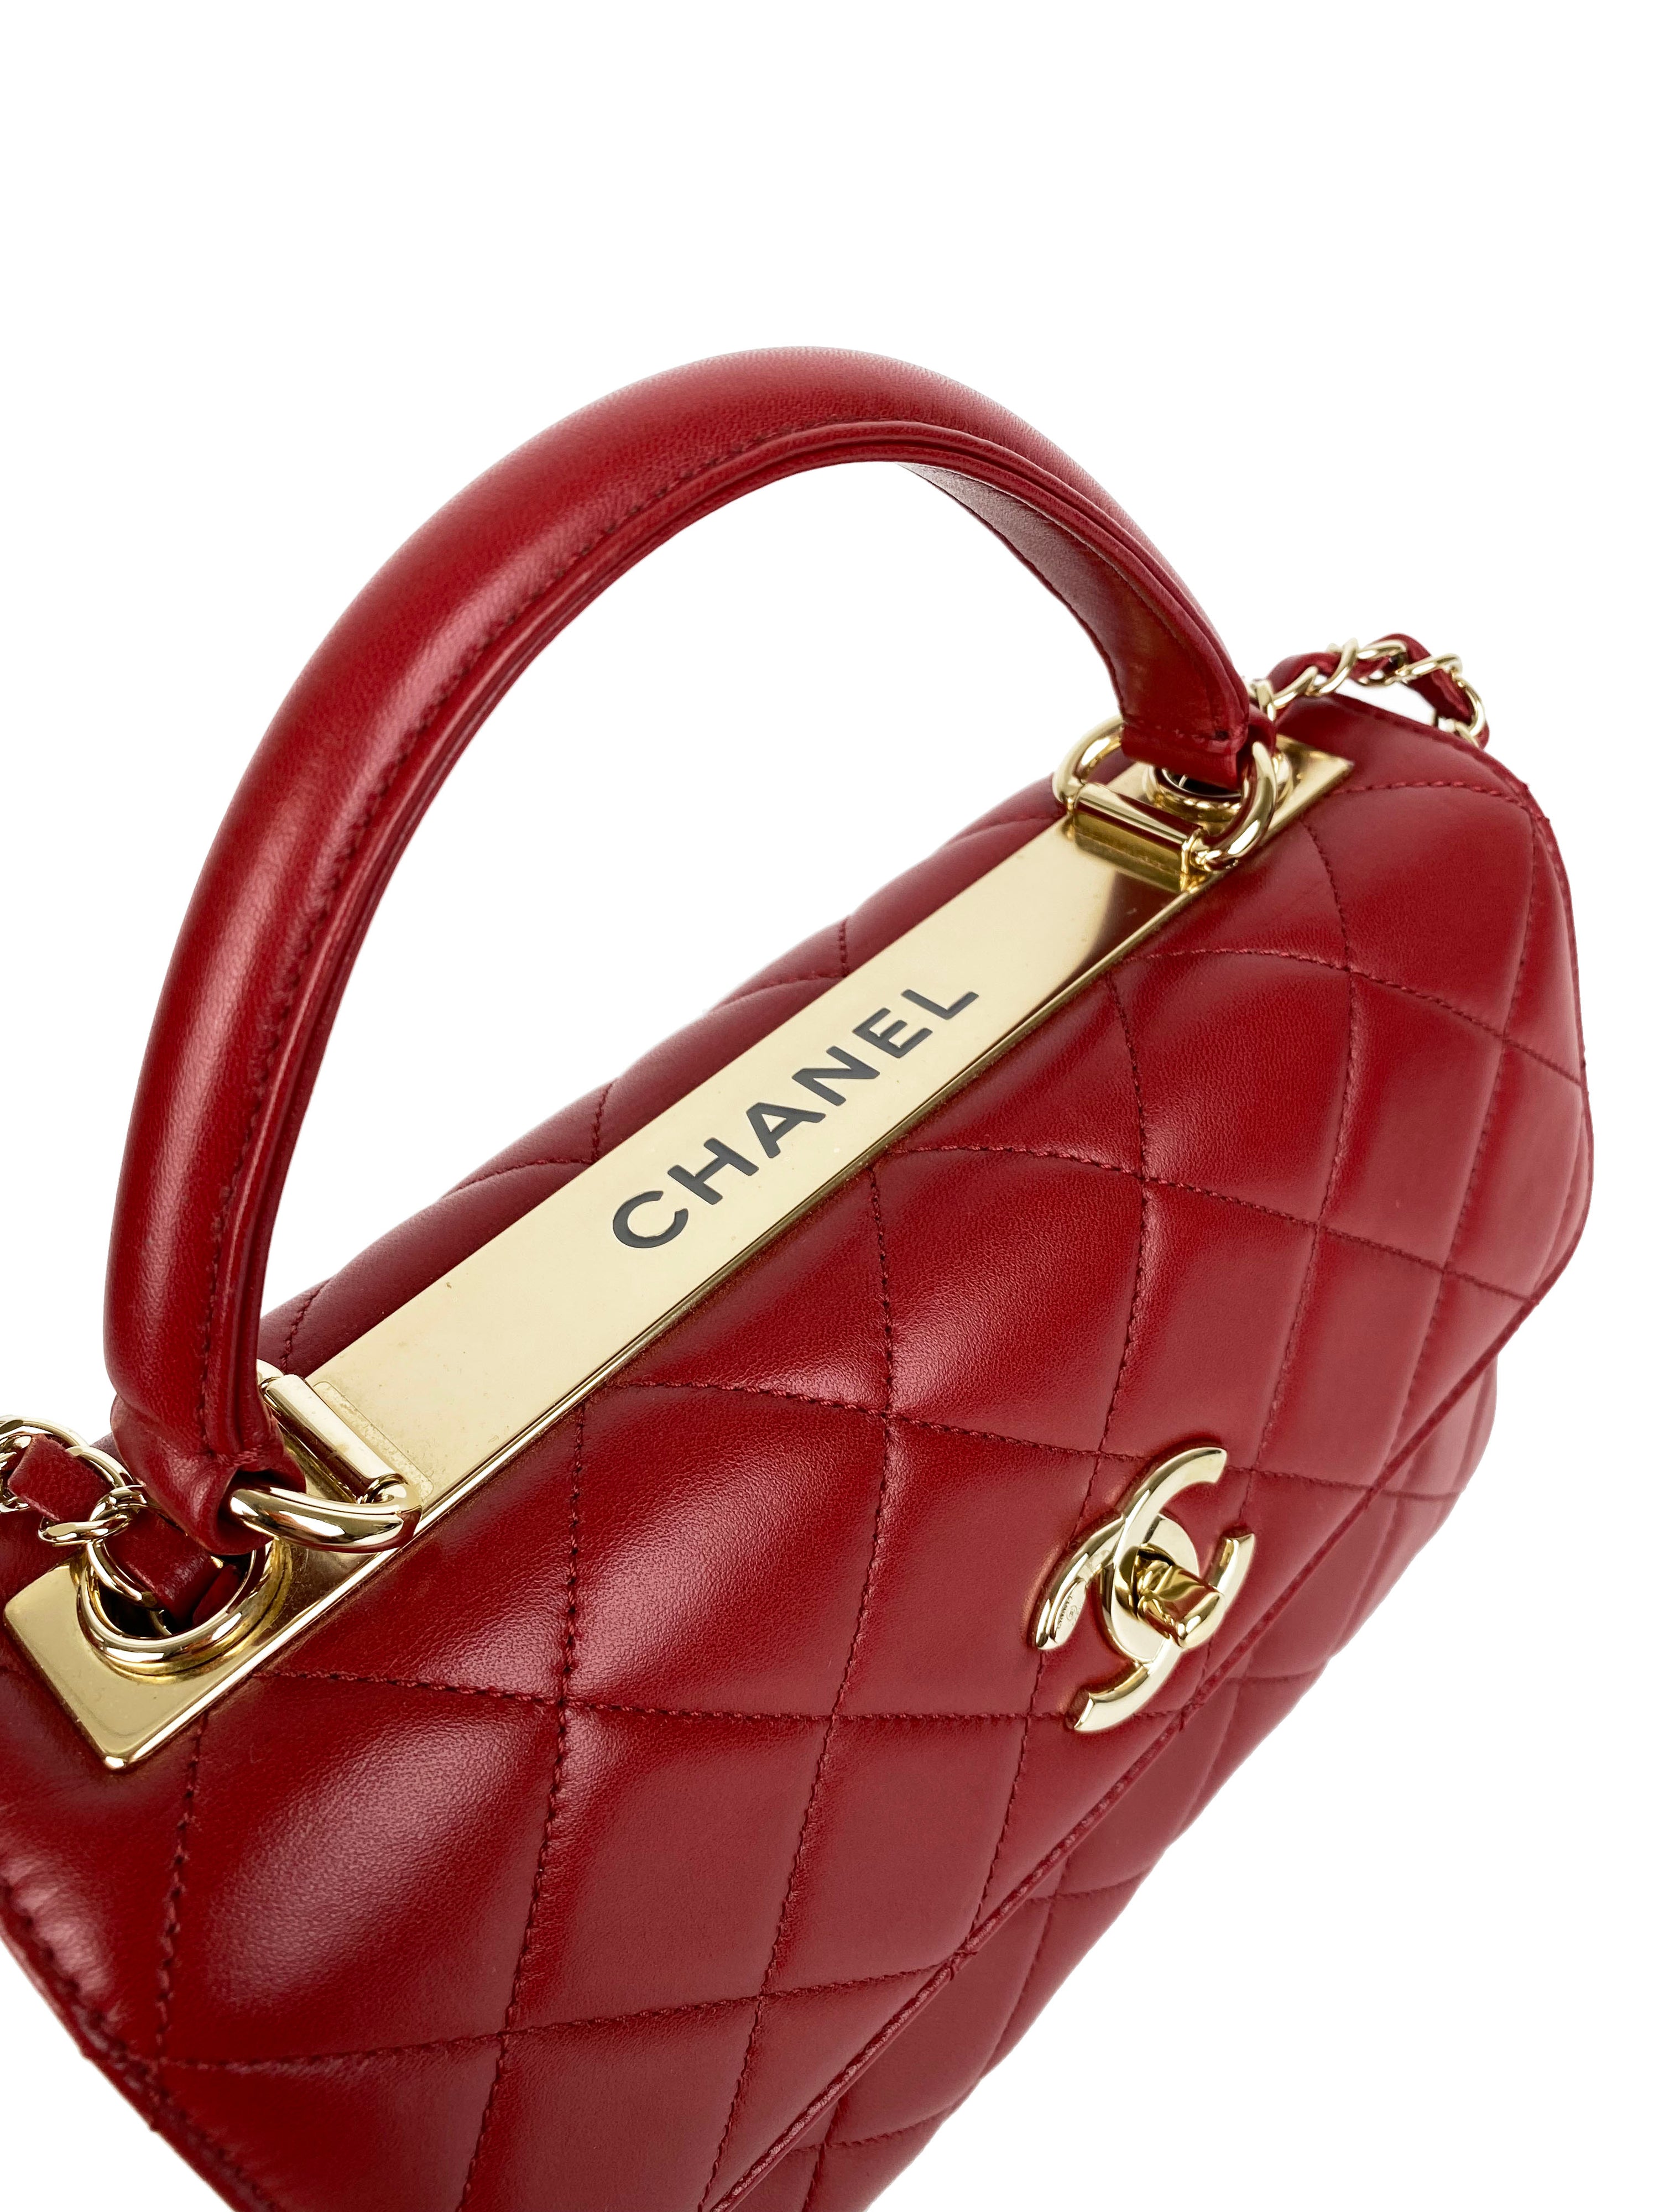 Chanel Small Red Trendy CC Bag